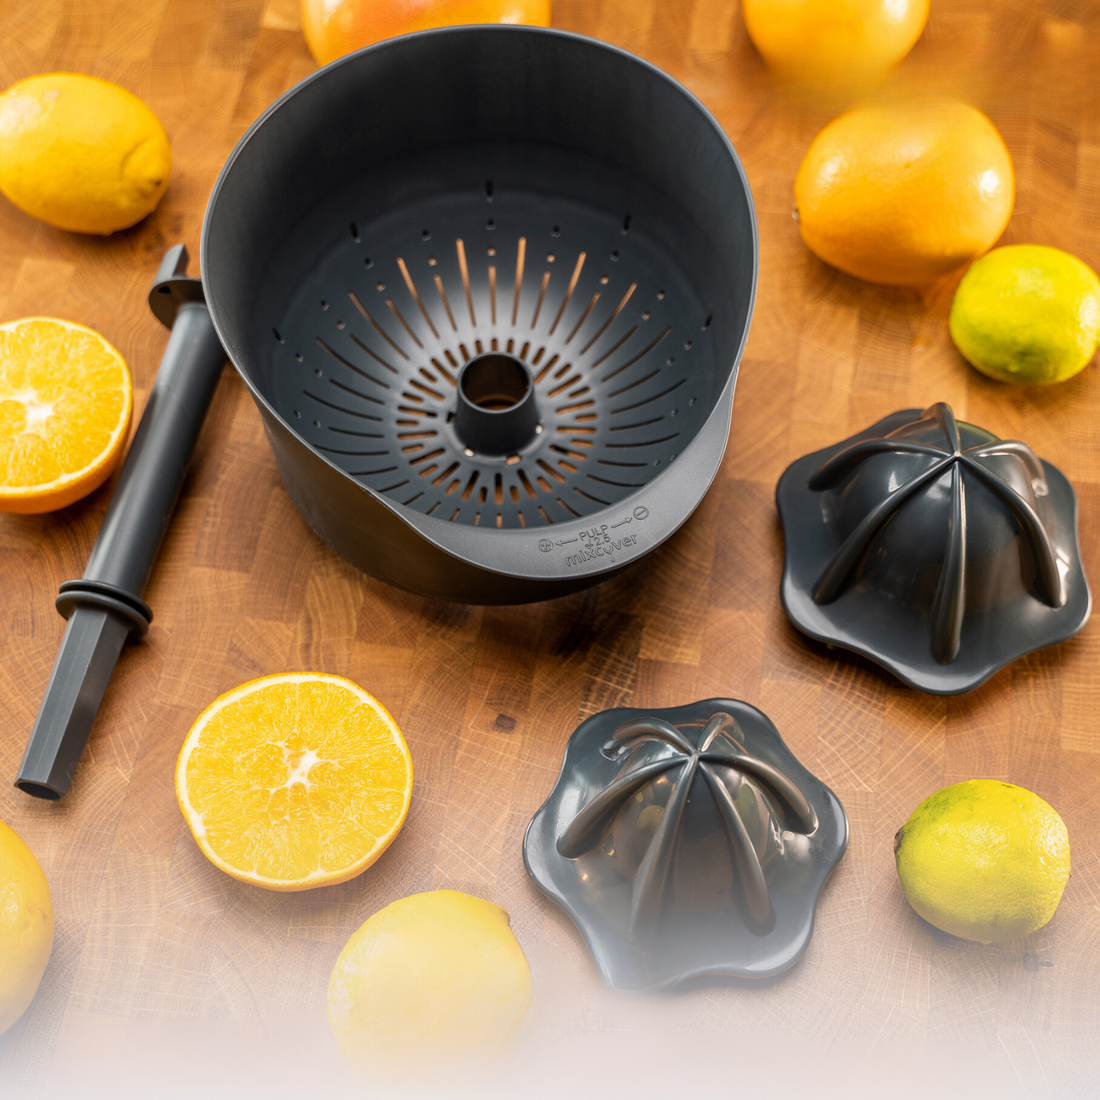 Juicer / citrus press compatible with the TM6 and TM5